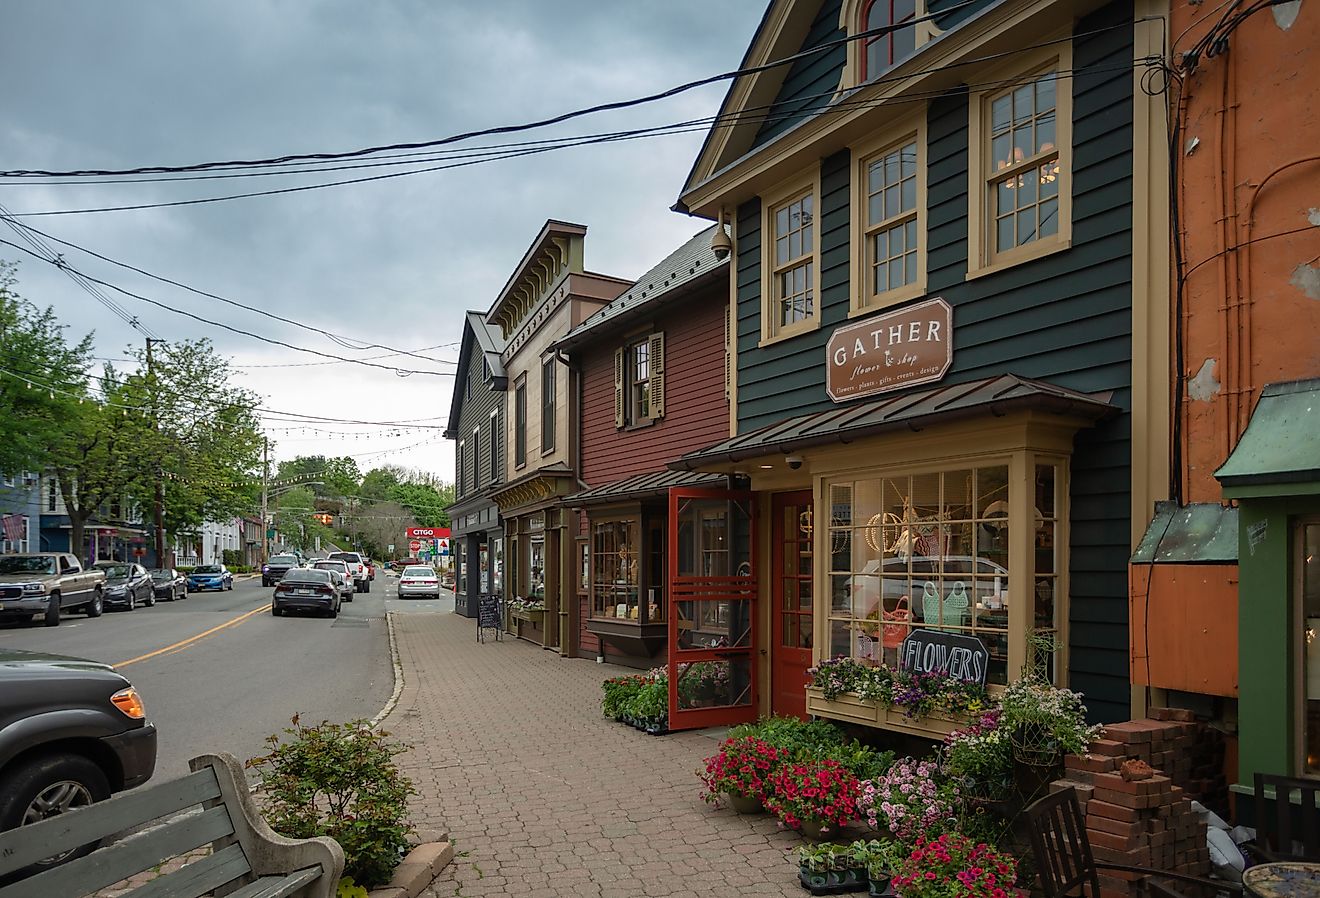 Downtown Frenchtown, New Jersey. Image credit christianthiel.net via Shutterstock.com